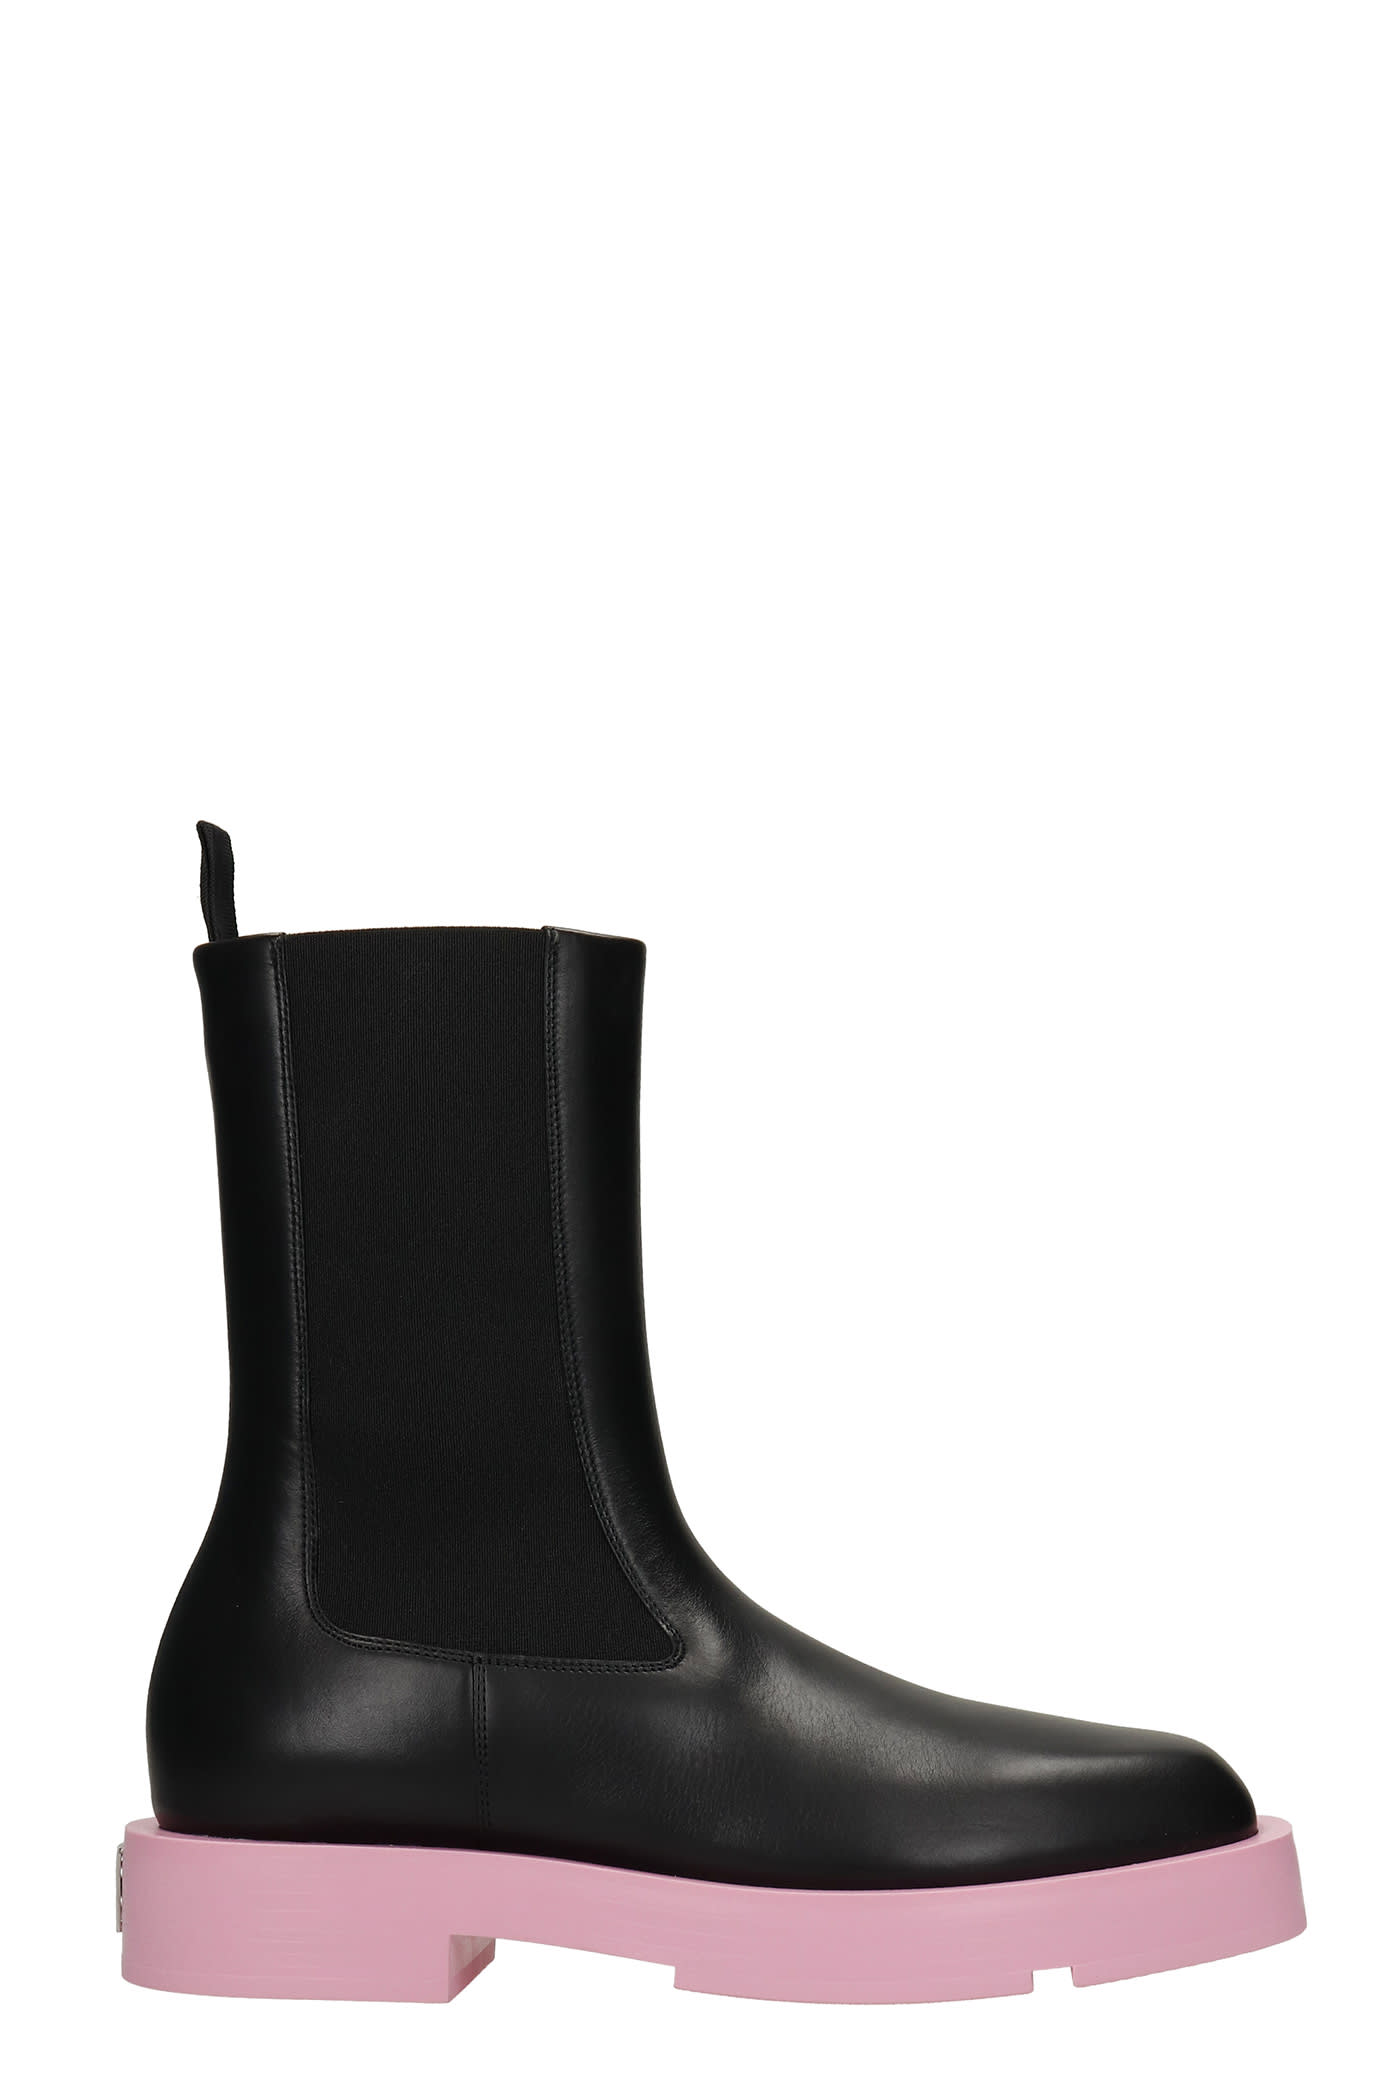 Givenchy Squared Combat Boots In Black Leather